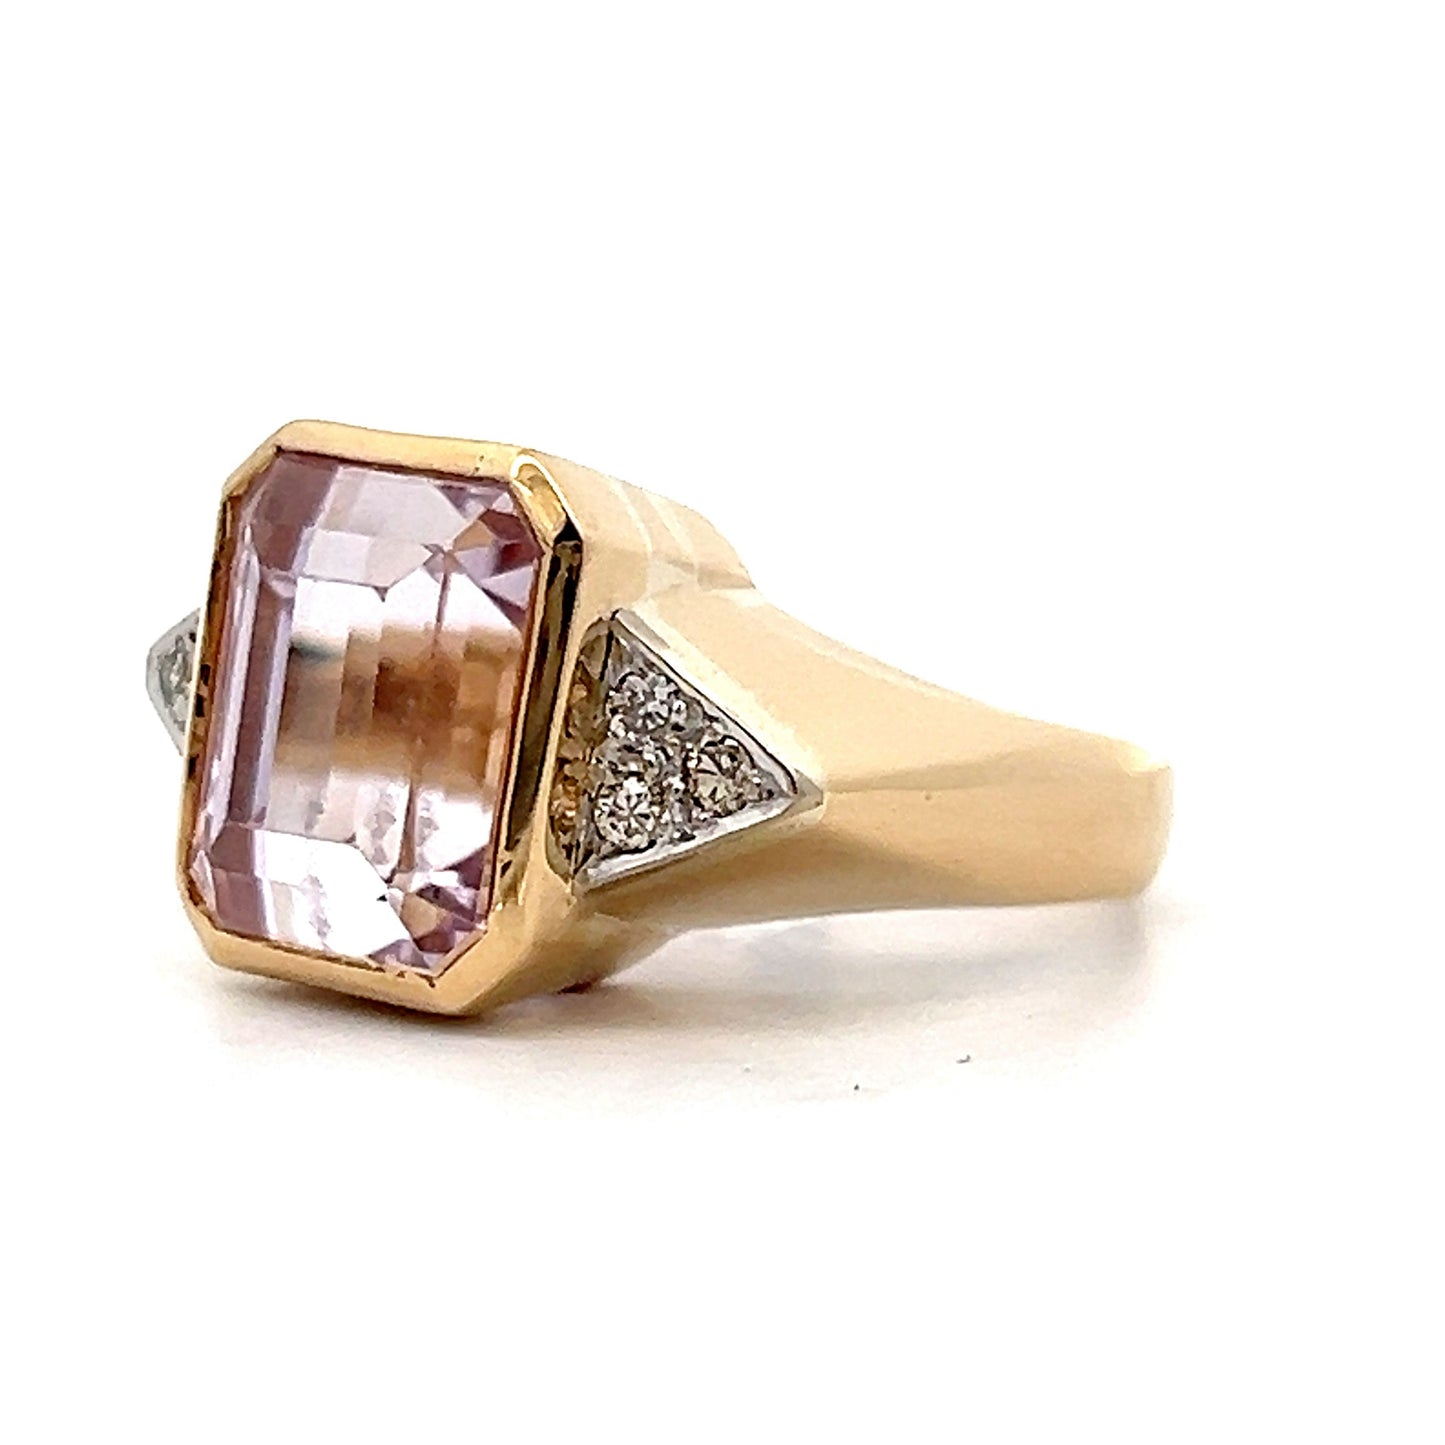 Vintage 1950's Kunzite Cocktail Ring in 18k Yellow Gold